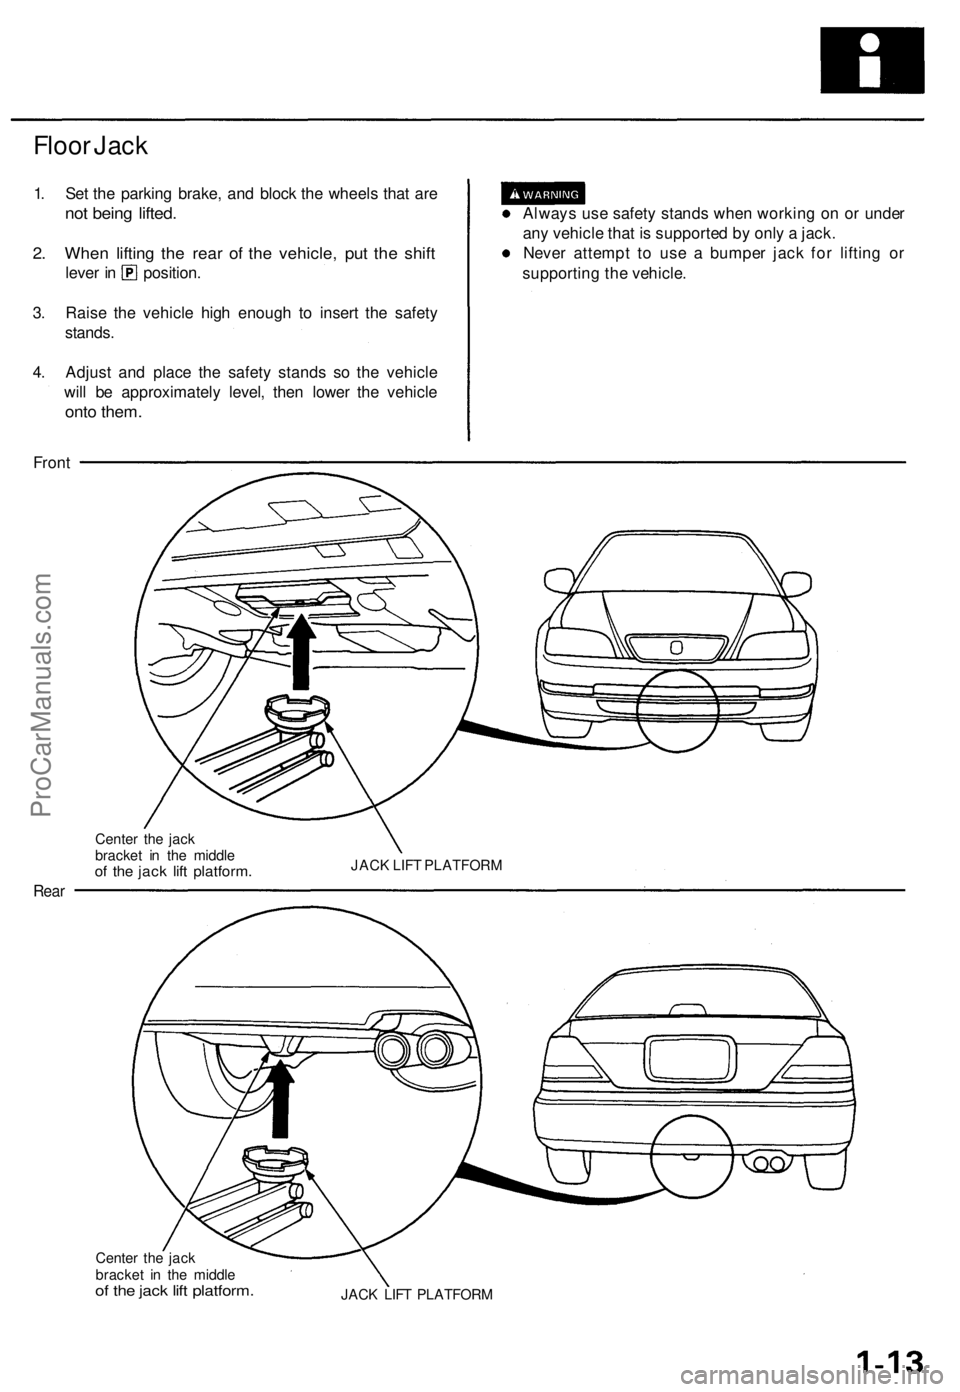 ACURA TL 1995  Service User Guide 
Floor Jack

1. Set the parking brake, and block the wheels that are

not being lifted.

2. When lifting the rear of the vehicle, put the shift

lever in position.

3. Raise the vehicle high enough to